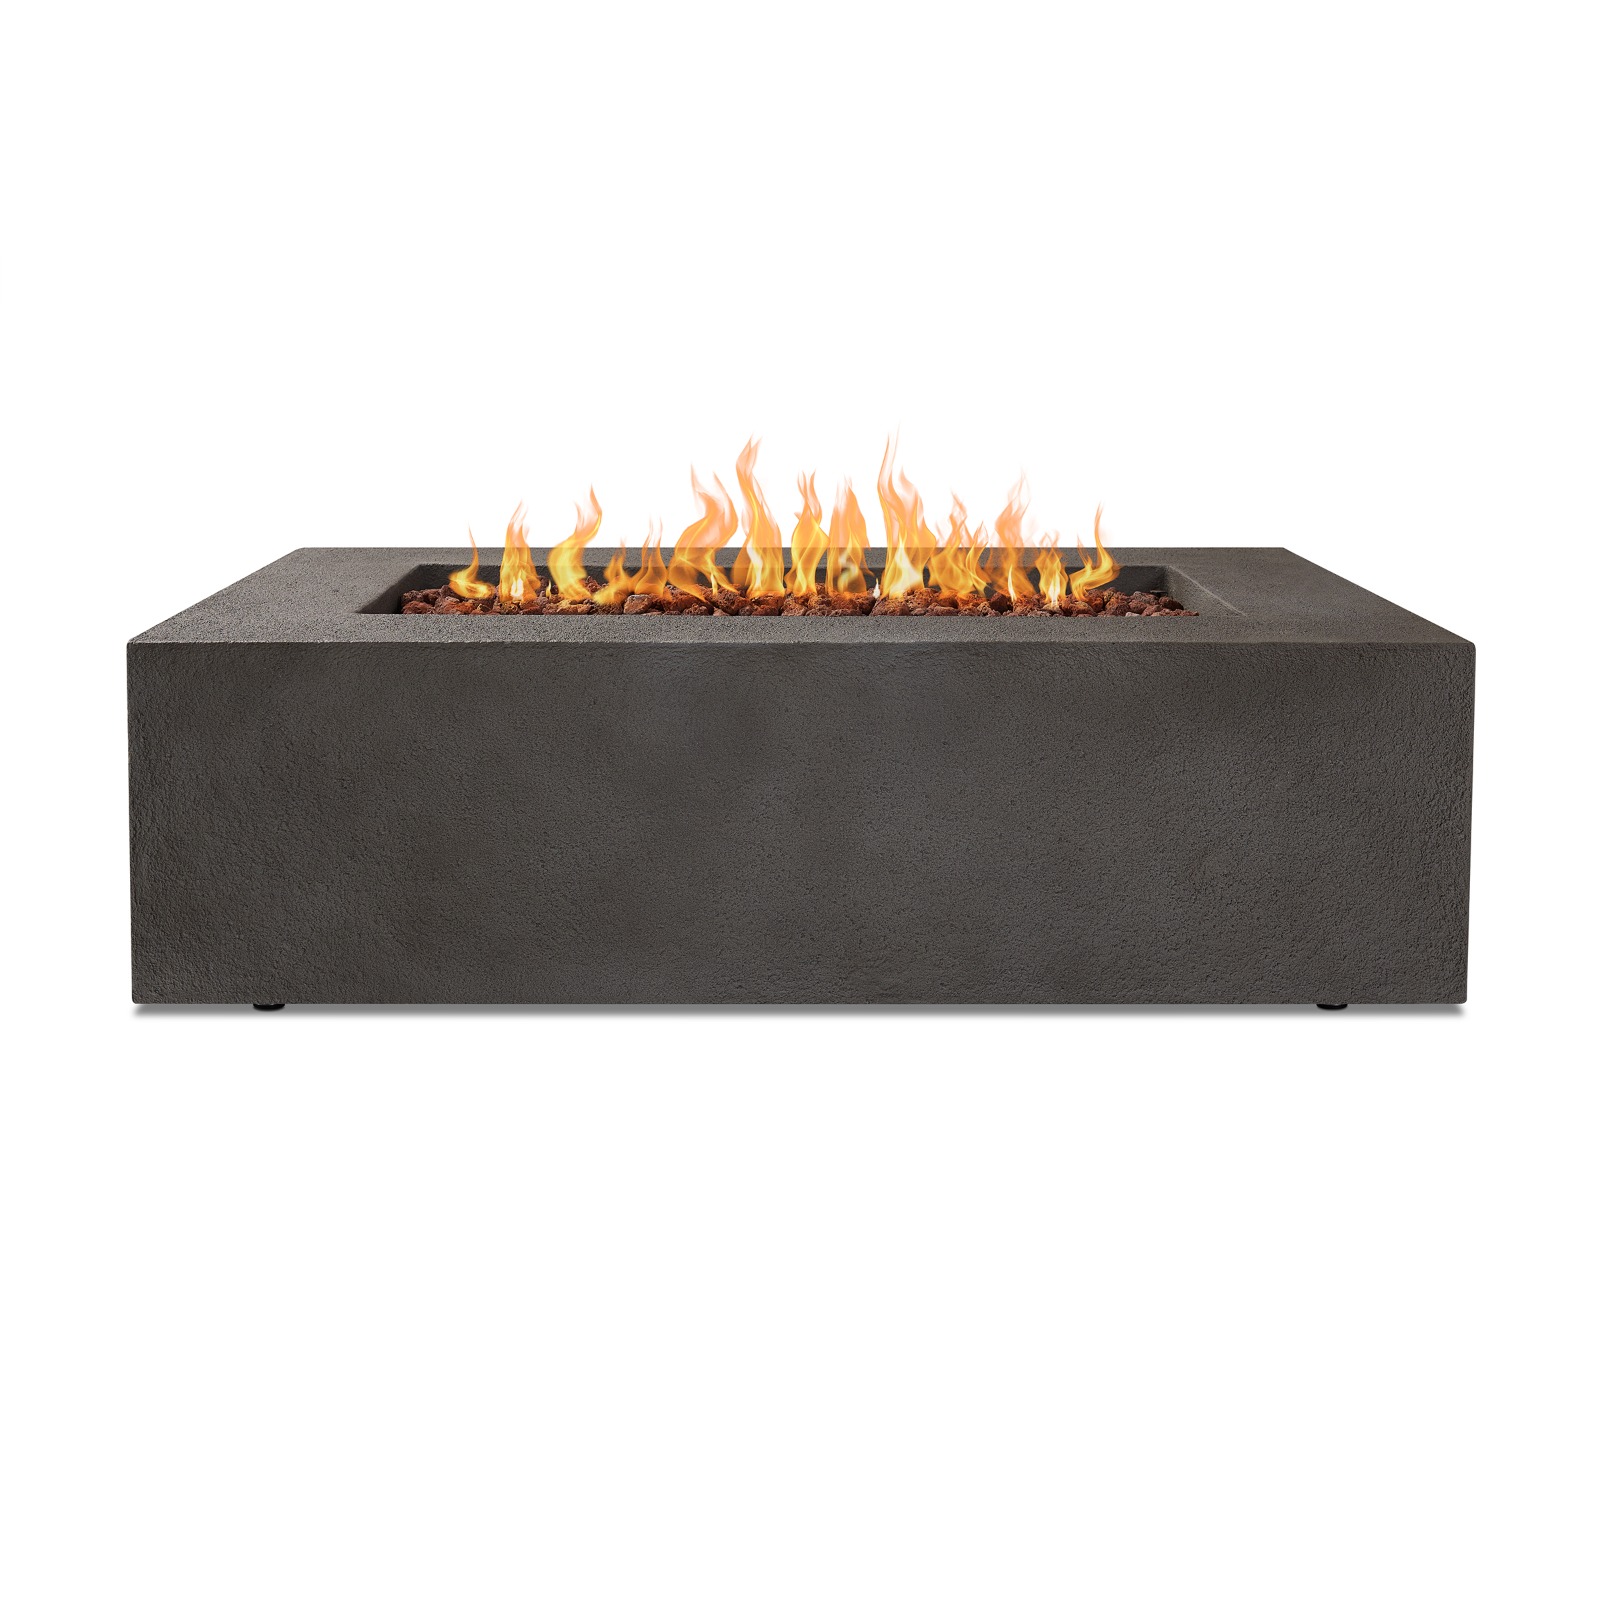 Baltic Rectangle MGO Concrete Gray Outdoor Fire Table Pit Fireplace